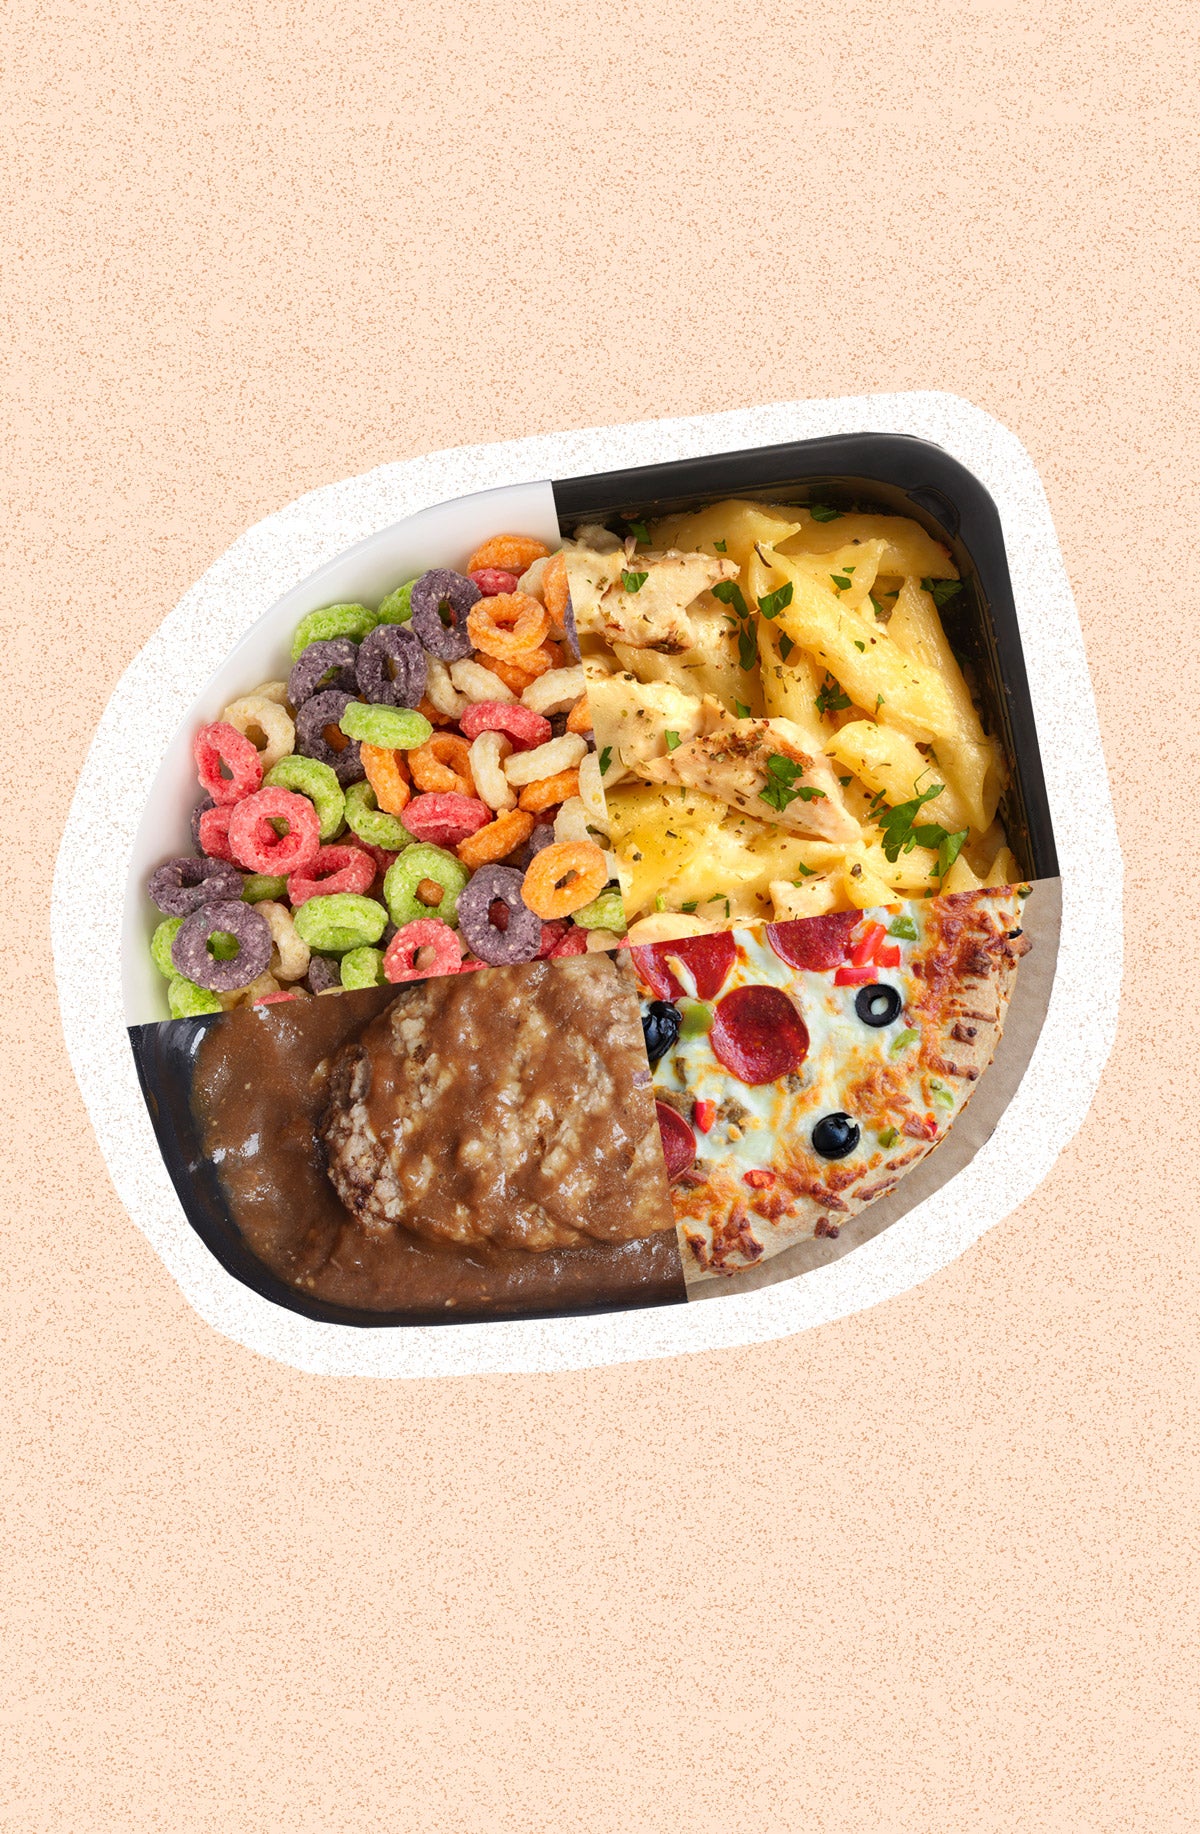 Photo illustration: A circle is divided into quarters of four types of processed food. From top left: fruit loop cereal, microwave pasta bake with chicken, frozen supreme pizza, microwave meat with gravy. The image is against a peach-speckled background.